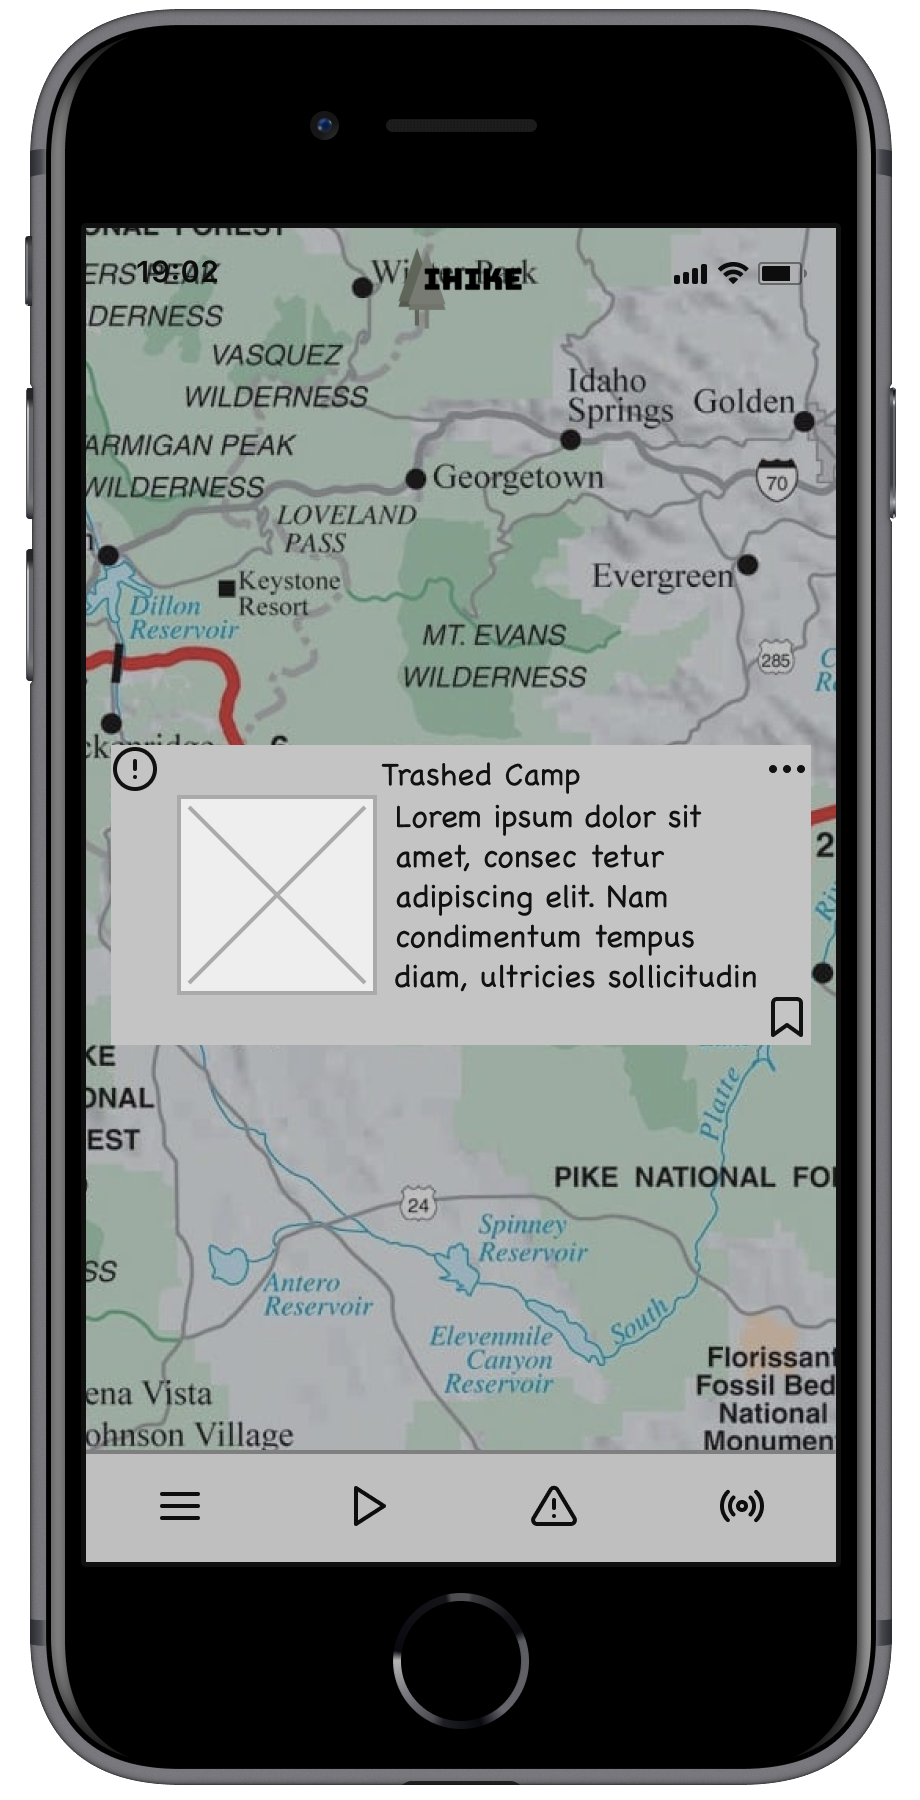 trail-report-from-map-2.png